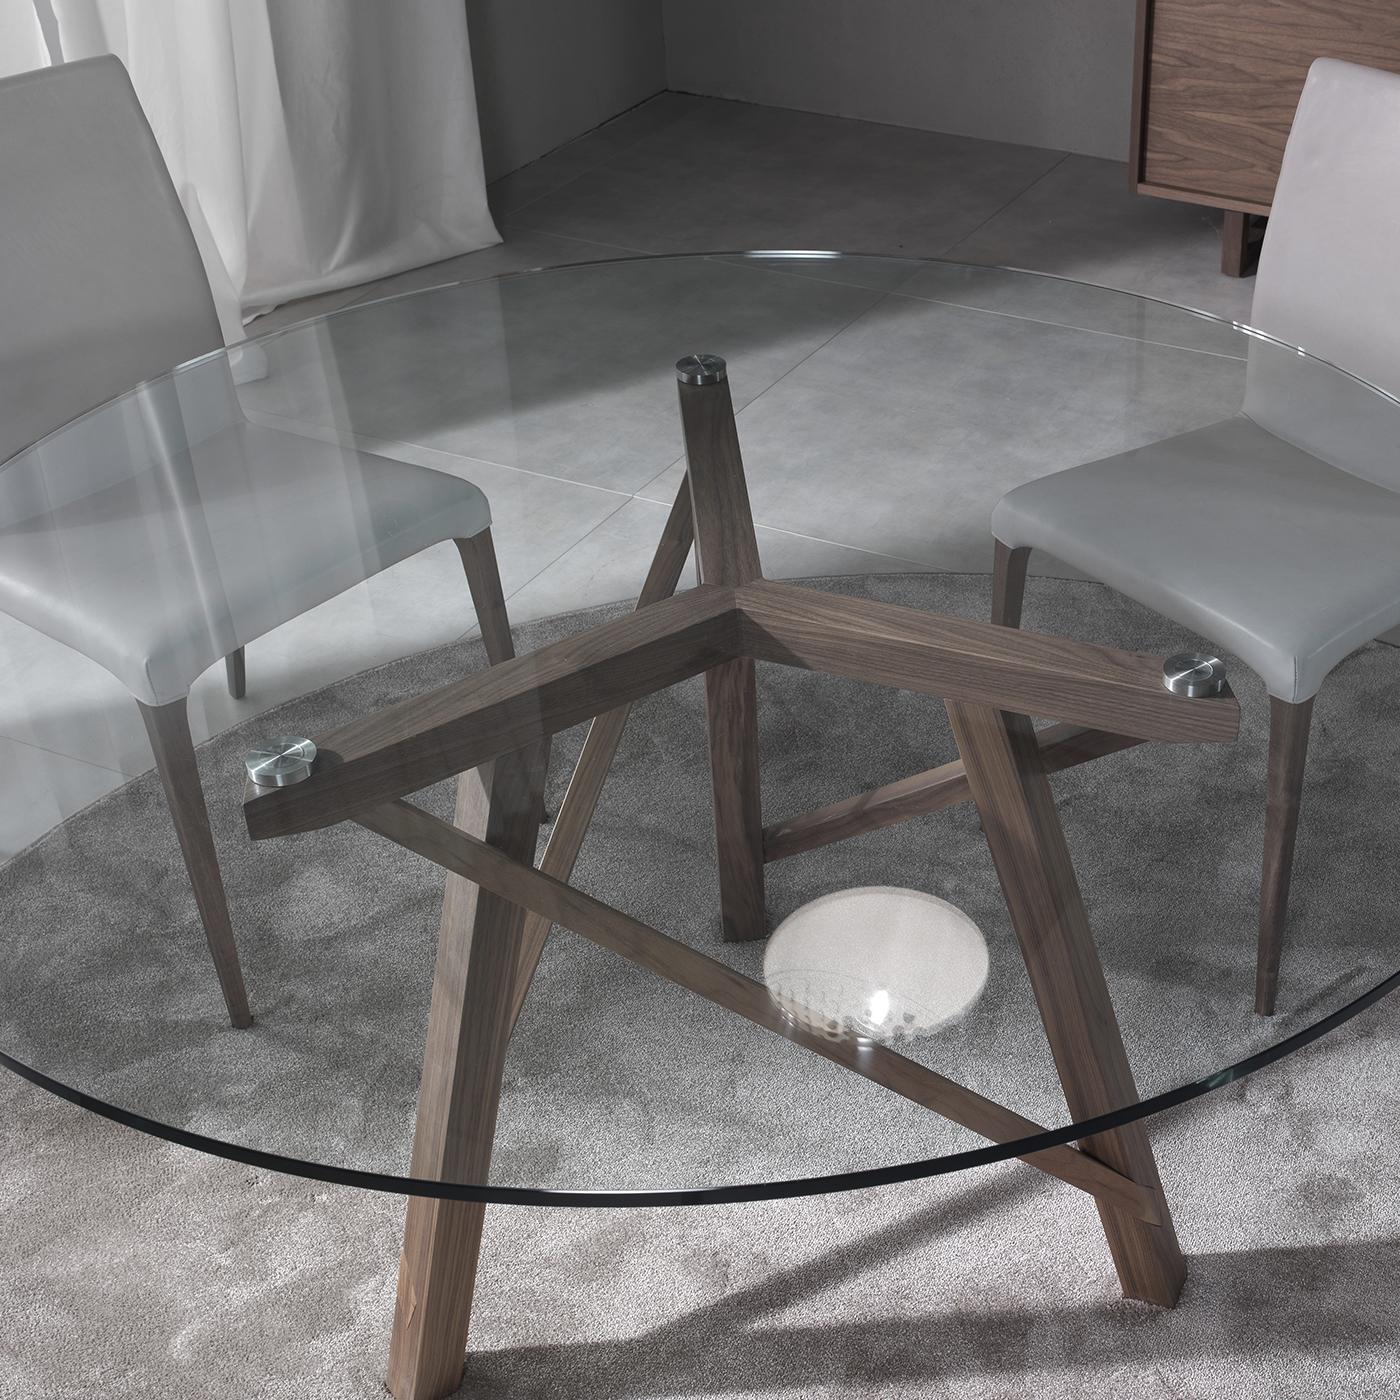 Designed by Giuliano and Gabriele Cappelletti, this round dining table is part of the Zeus collection. The clear glass top allows complete view of the stunningly dynamic structure below made of Canaletto walnut that comprises three diagonal legs